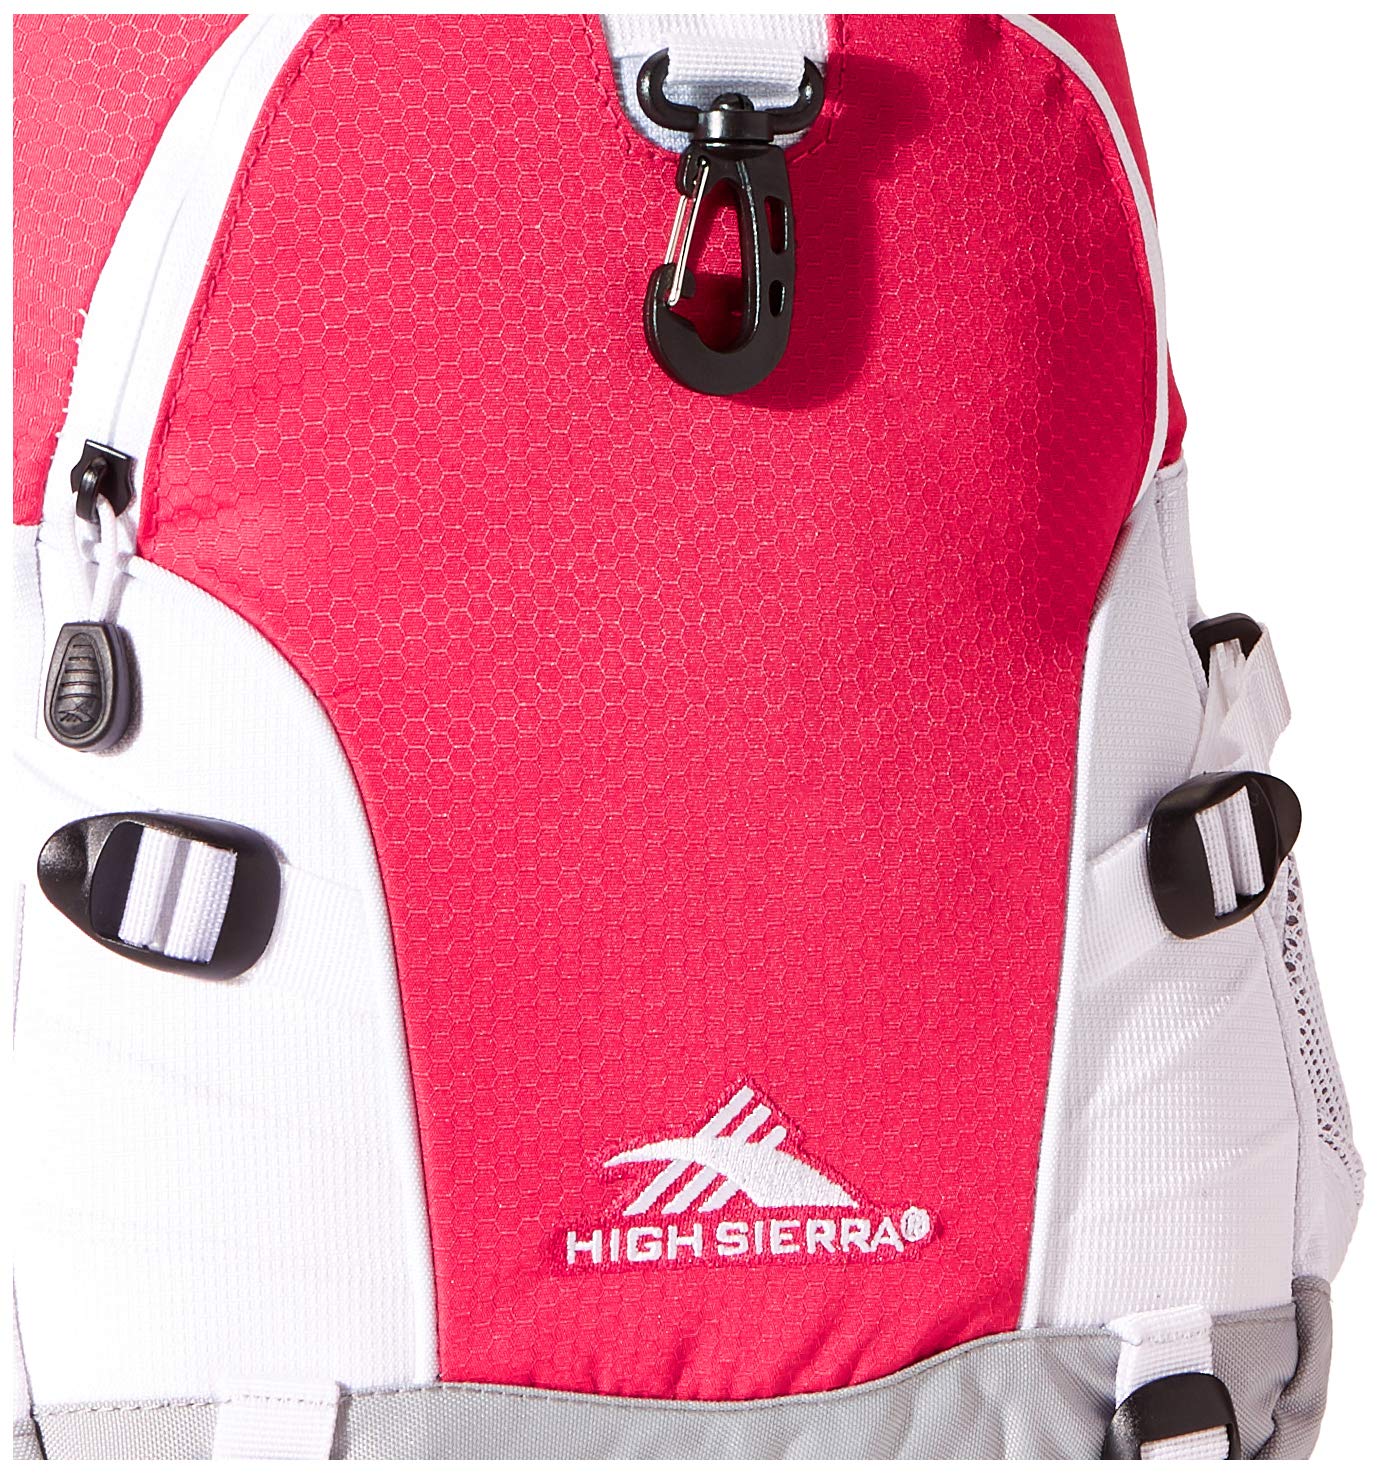 High Sierra Loop Backpack, Travel, or Work Bookbag with tablet sleeve, One Size, Pink Punch/White/Ash